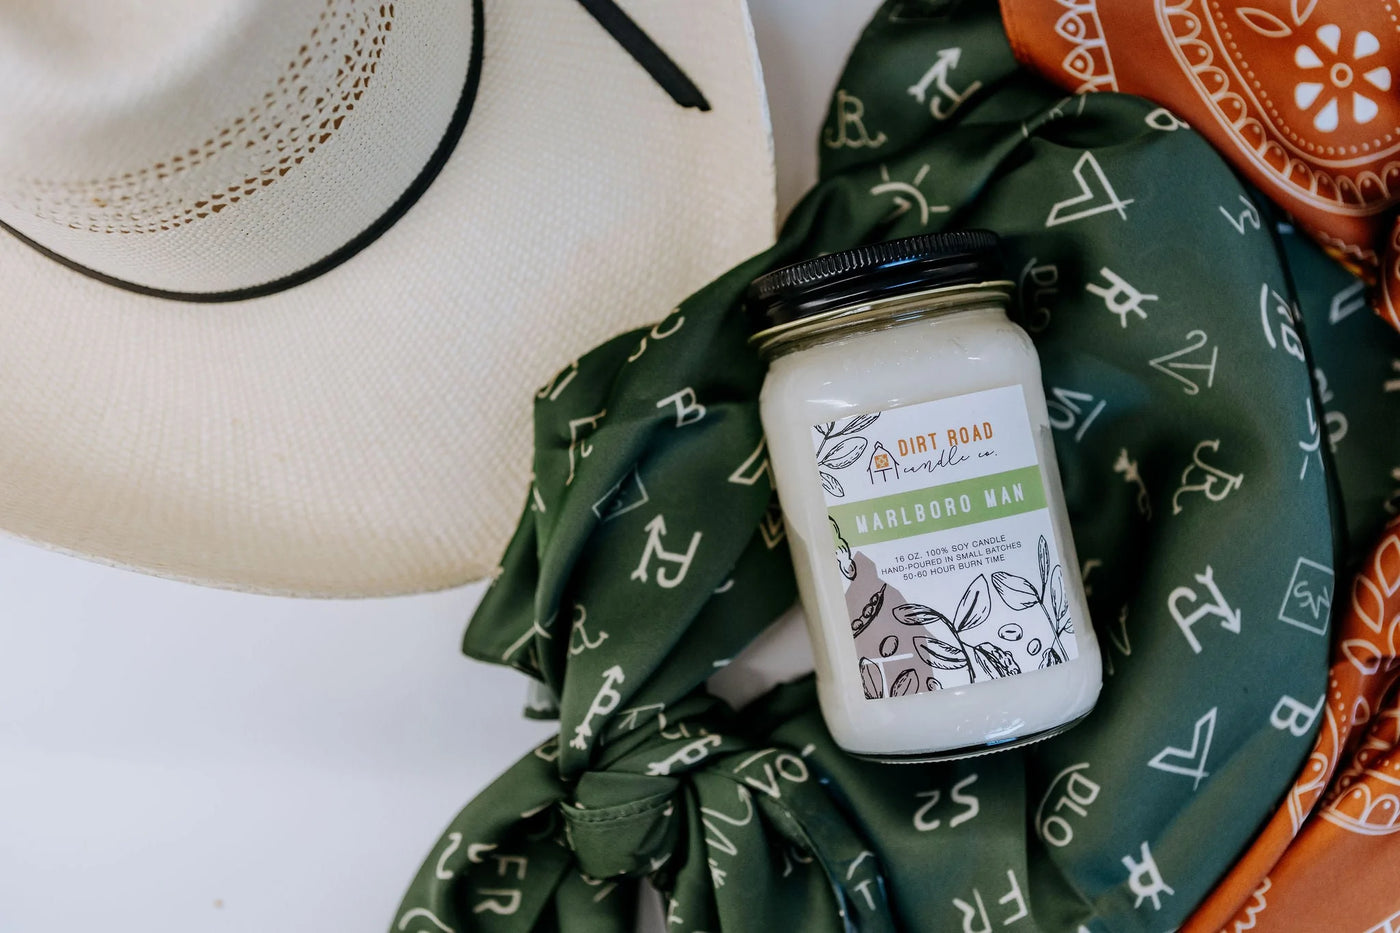 Dirt Road Candle Co Marlboro Man Candle